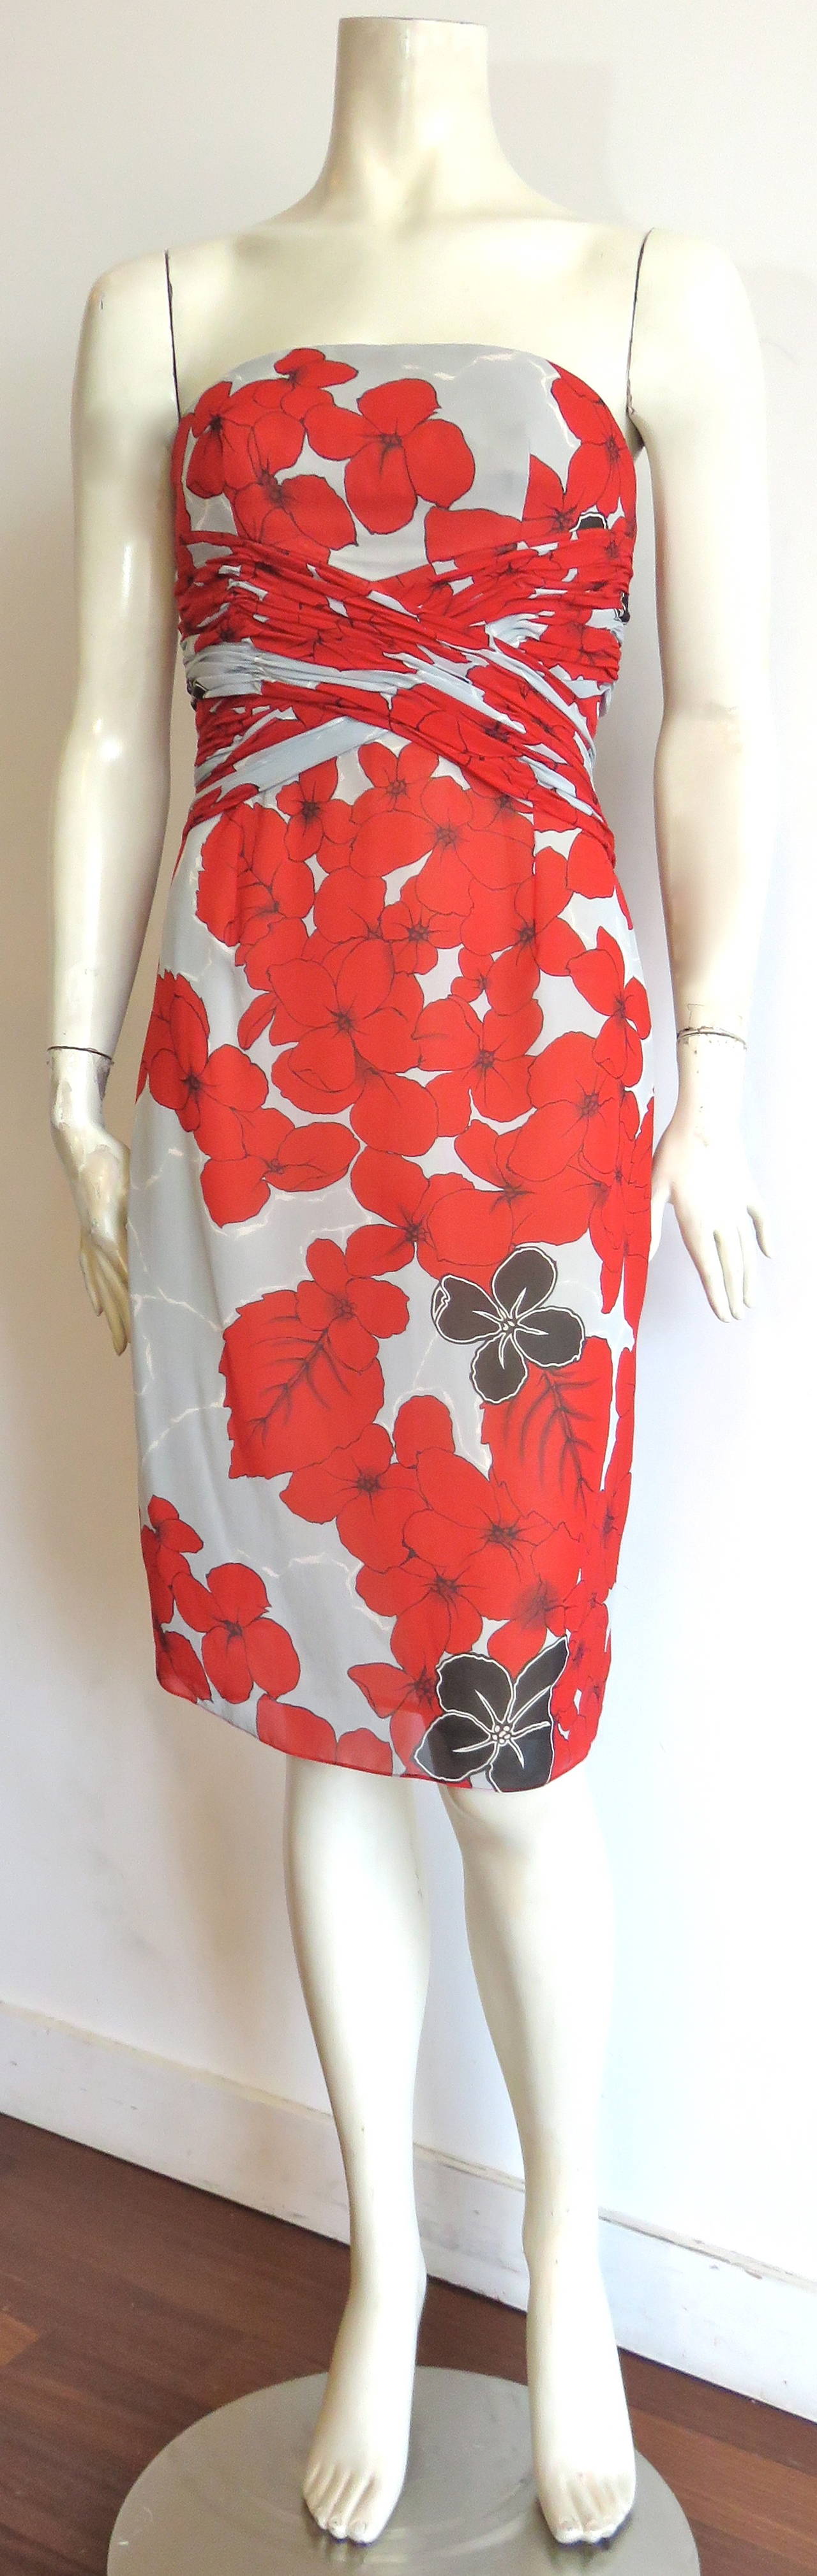 Worn once, CAROLINA HERRERA Silk crepe, floral cocktail dress.

Red and black floral print atop whisper gray/white marble ground.

Flattering, criss-cross, ruché construction at the front waist with attached, long sash tie at the